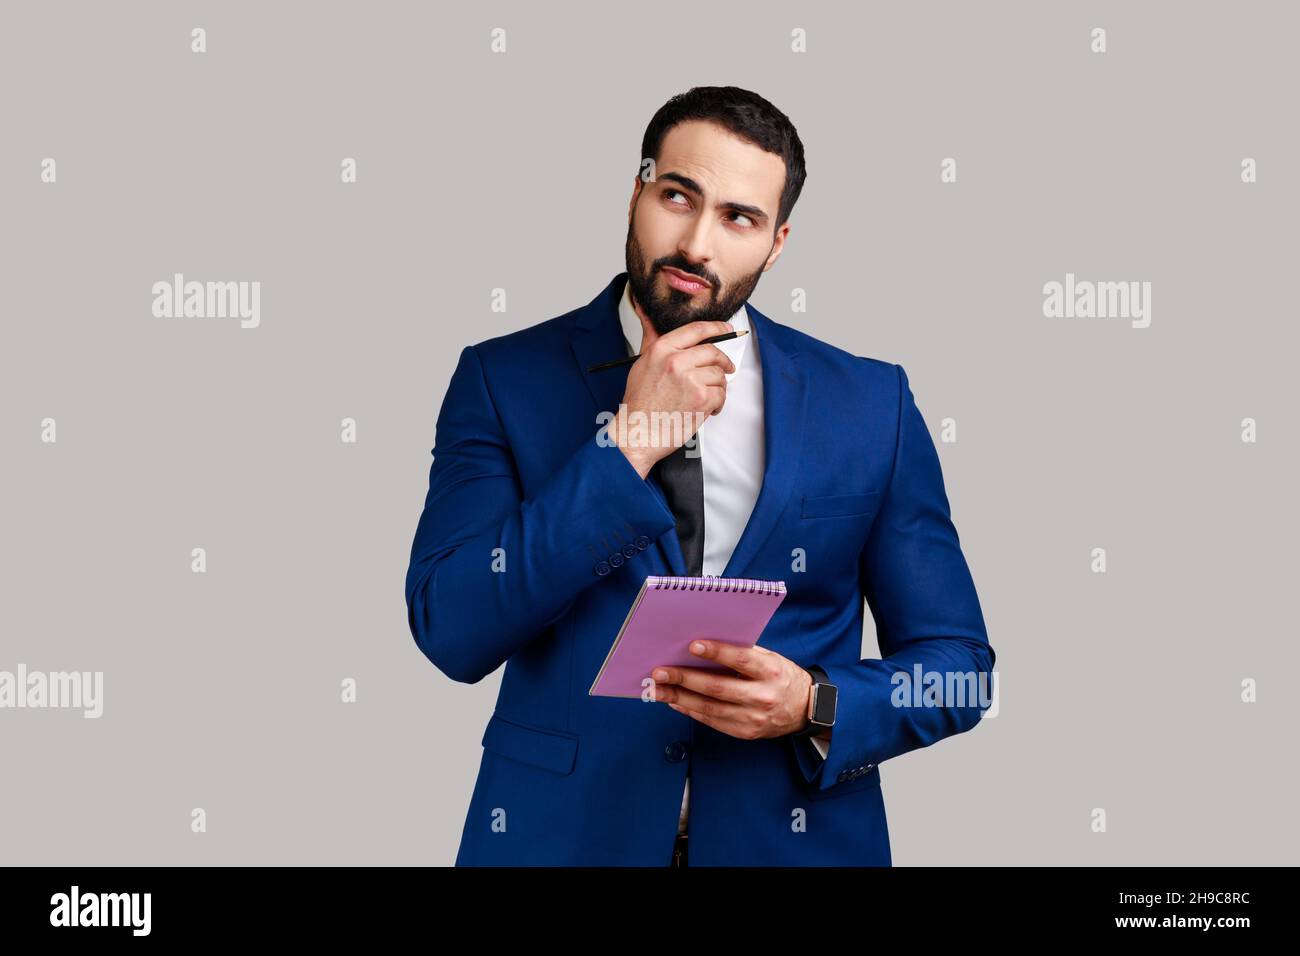 Young adult businessman standing with thoughtful expression, holding paper notebook, pondering business idea, future plans, wearing official style suit. Indoor studio shot isolated on gray background. Stock Photo